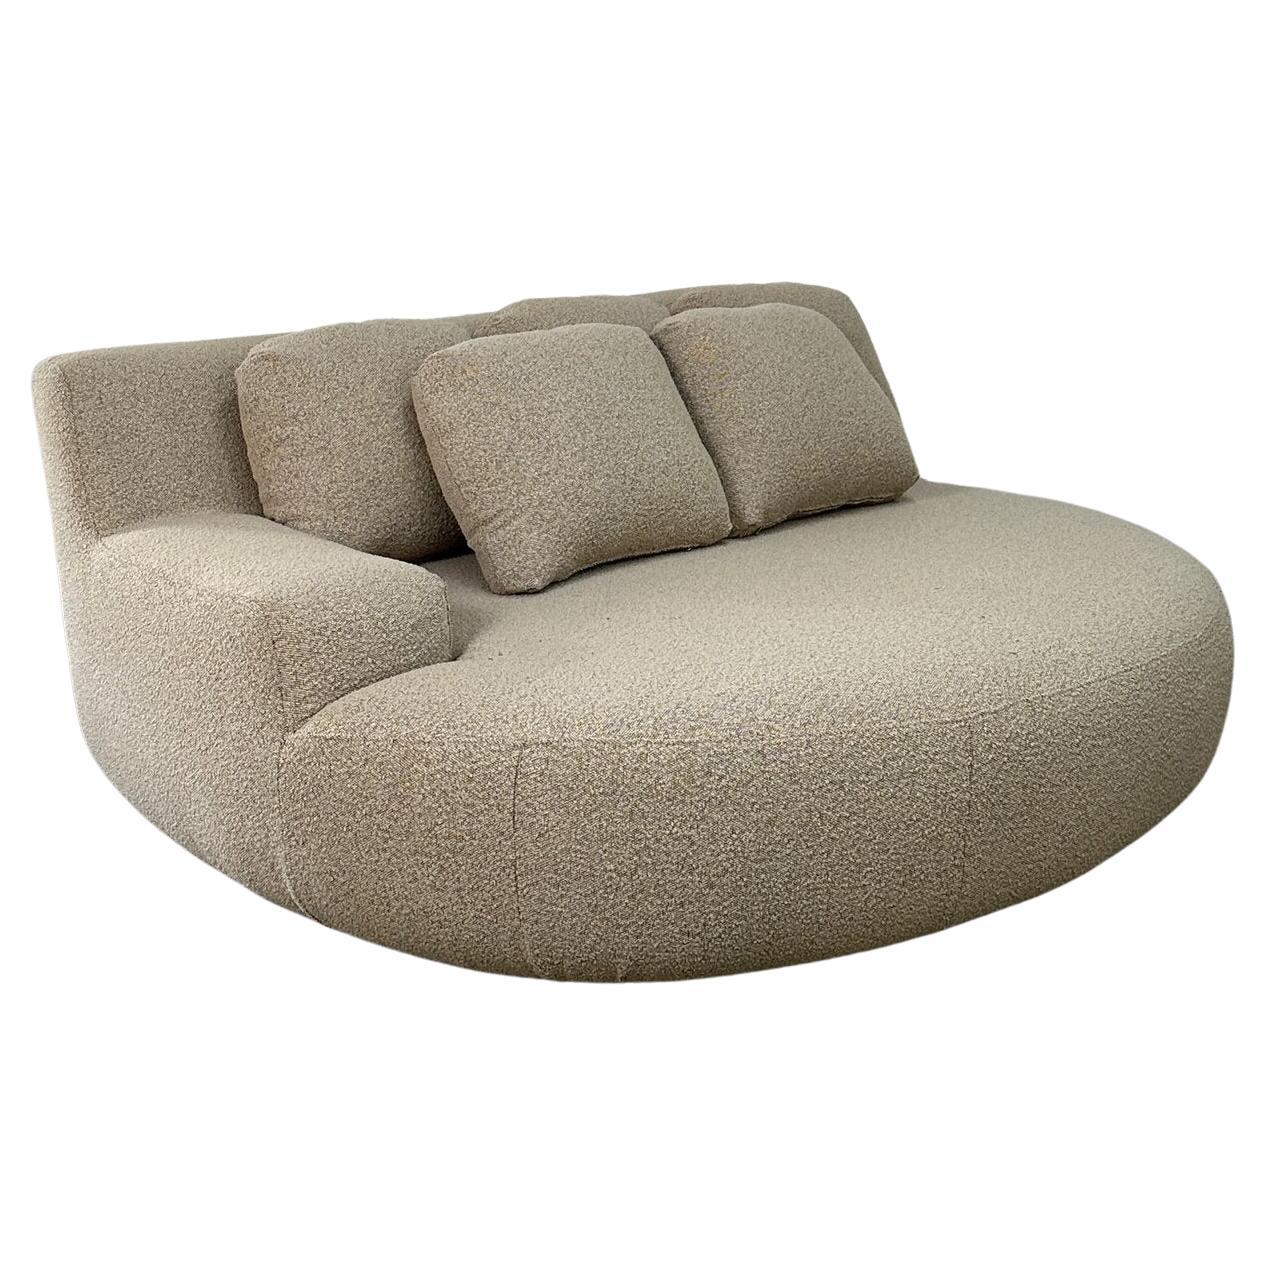 Oversized daybed in beige boucle For Sale